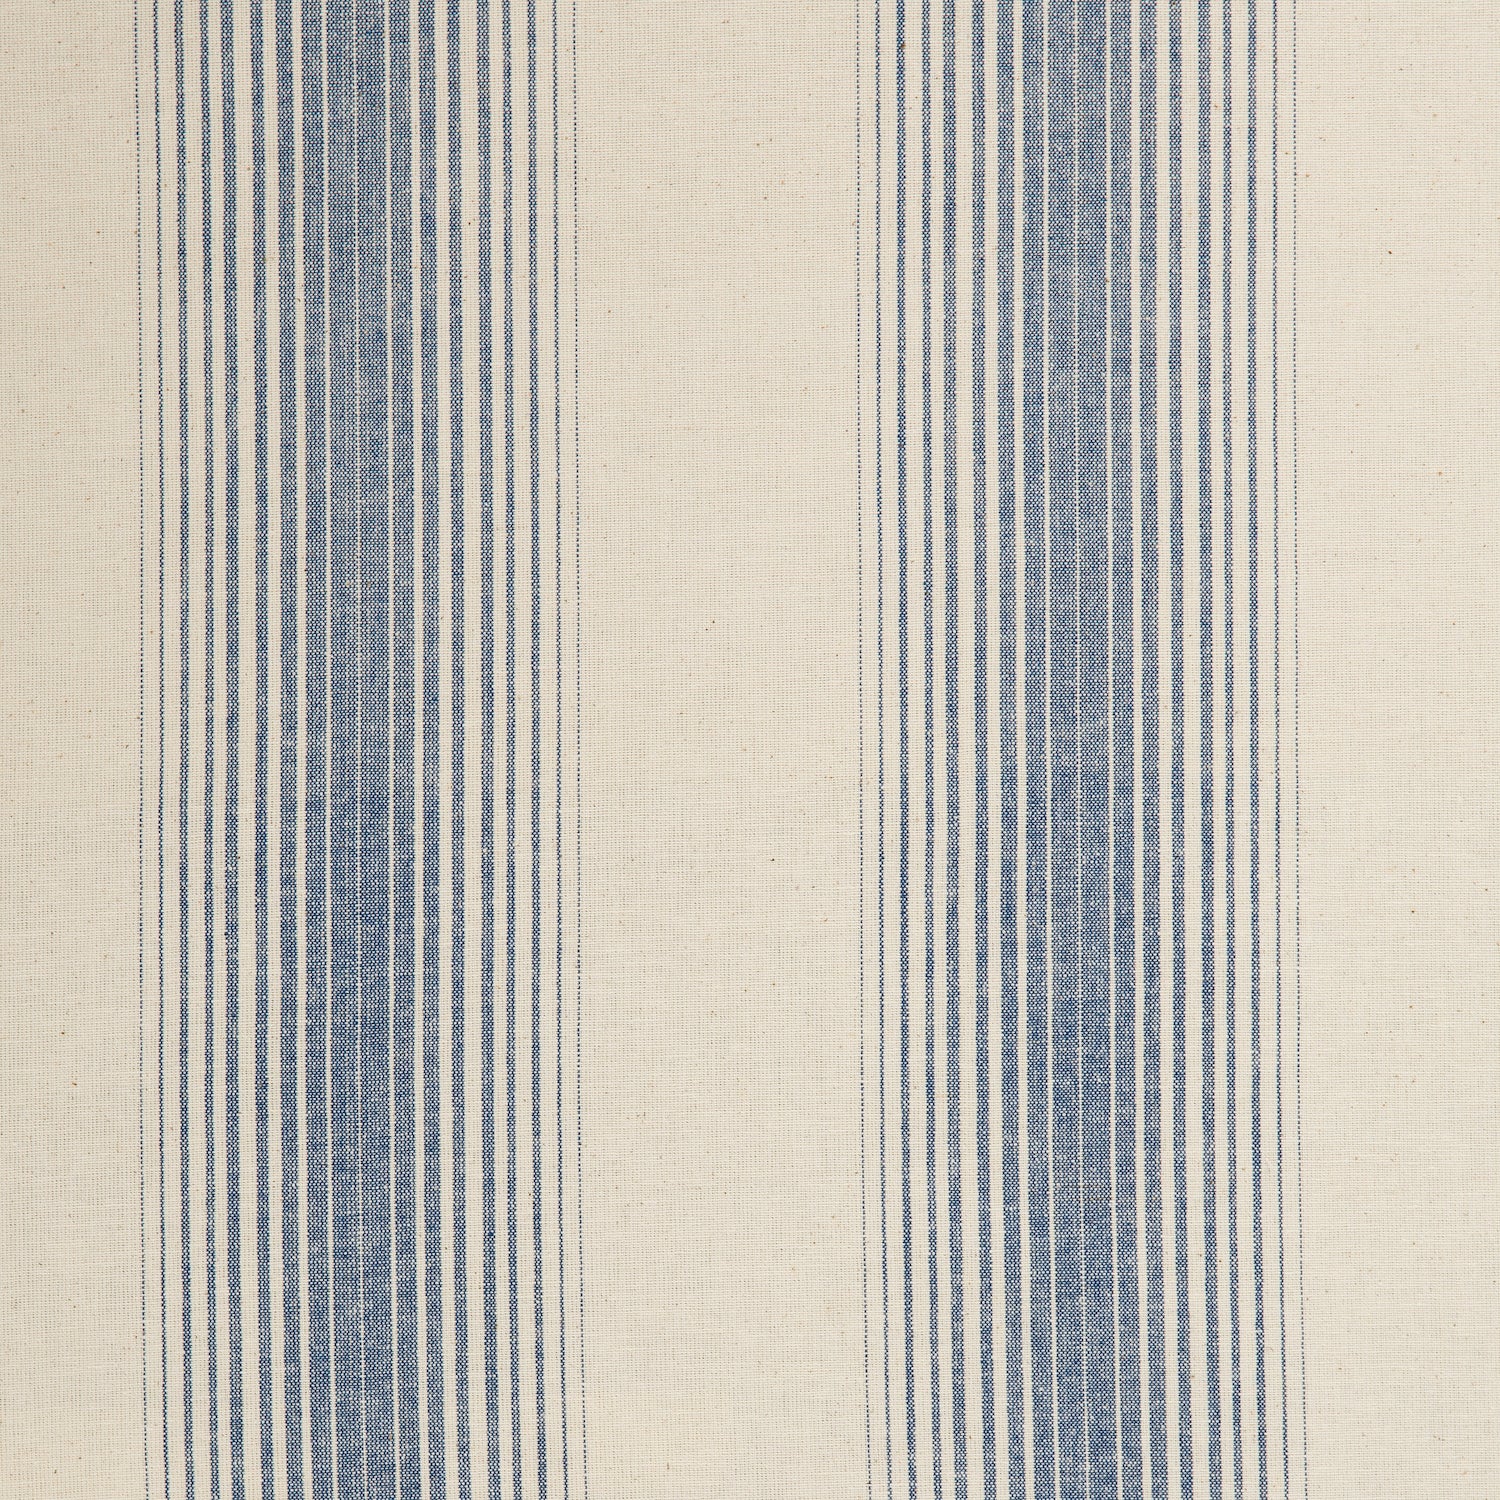 Detail of a cotton fabric in an irregular stripe pattern in blue on a cream field.